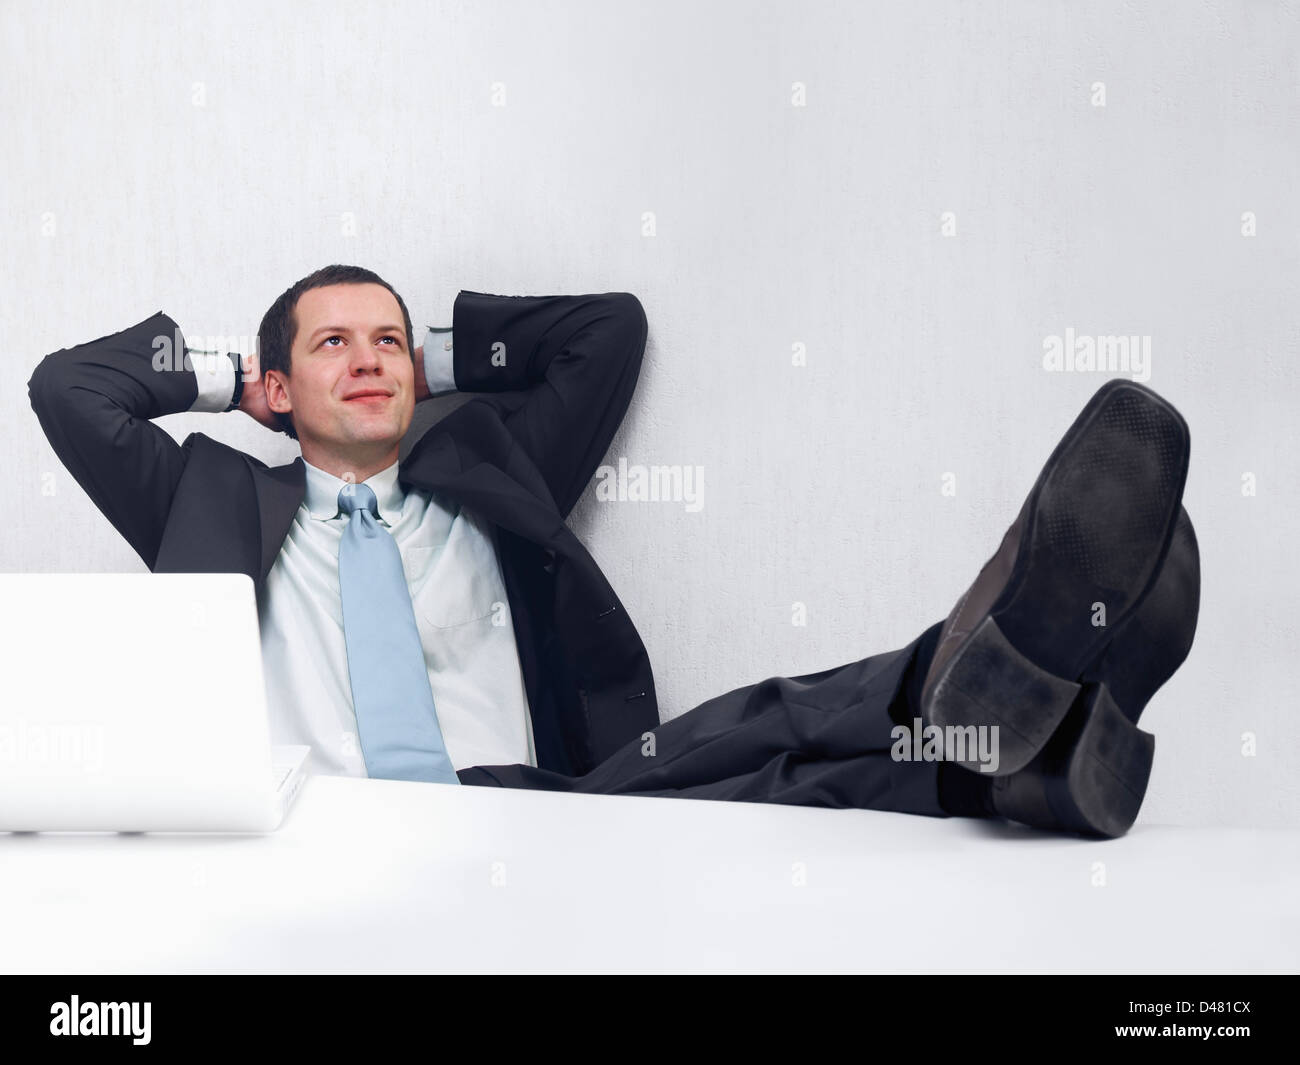 A businessman daydreaming of good things to come. Stock Photo